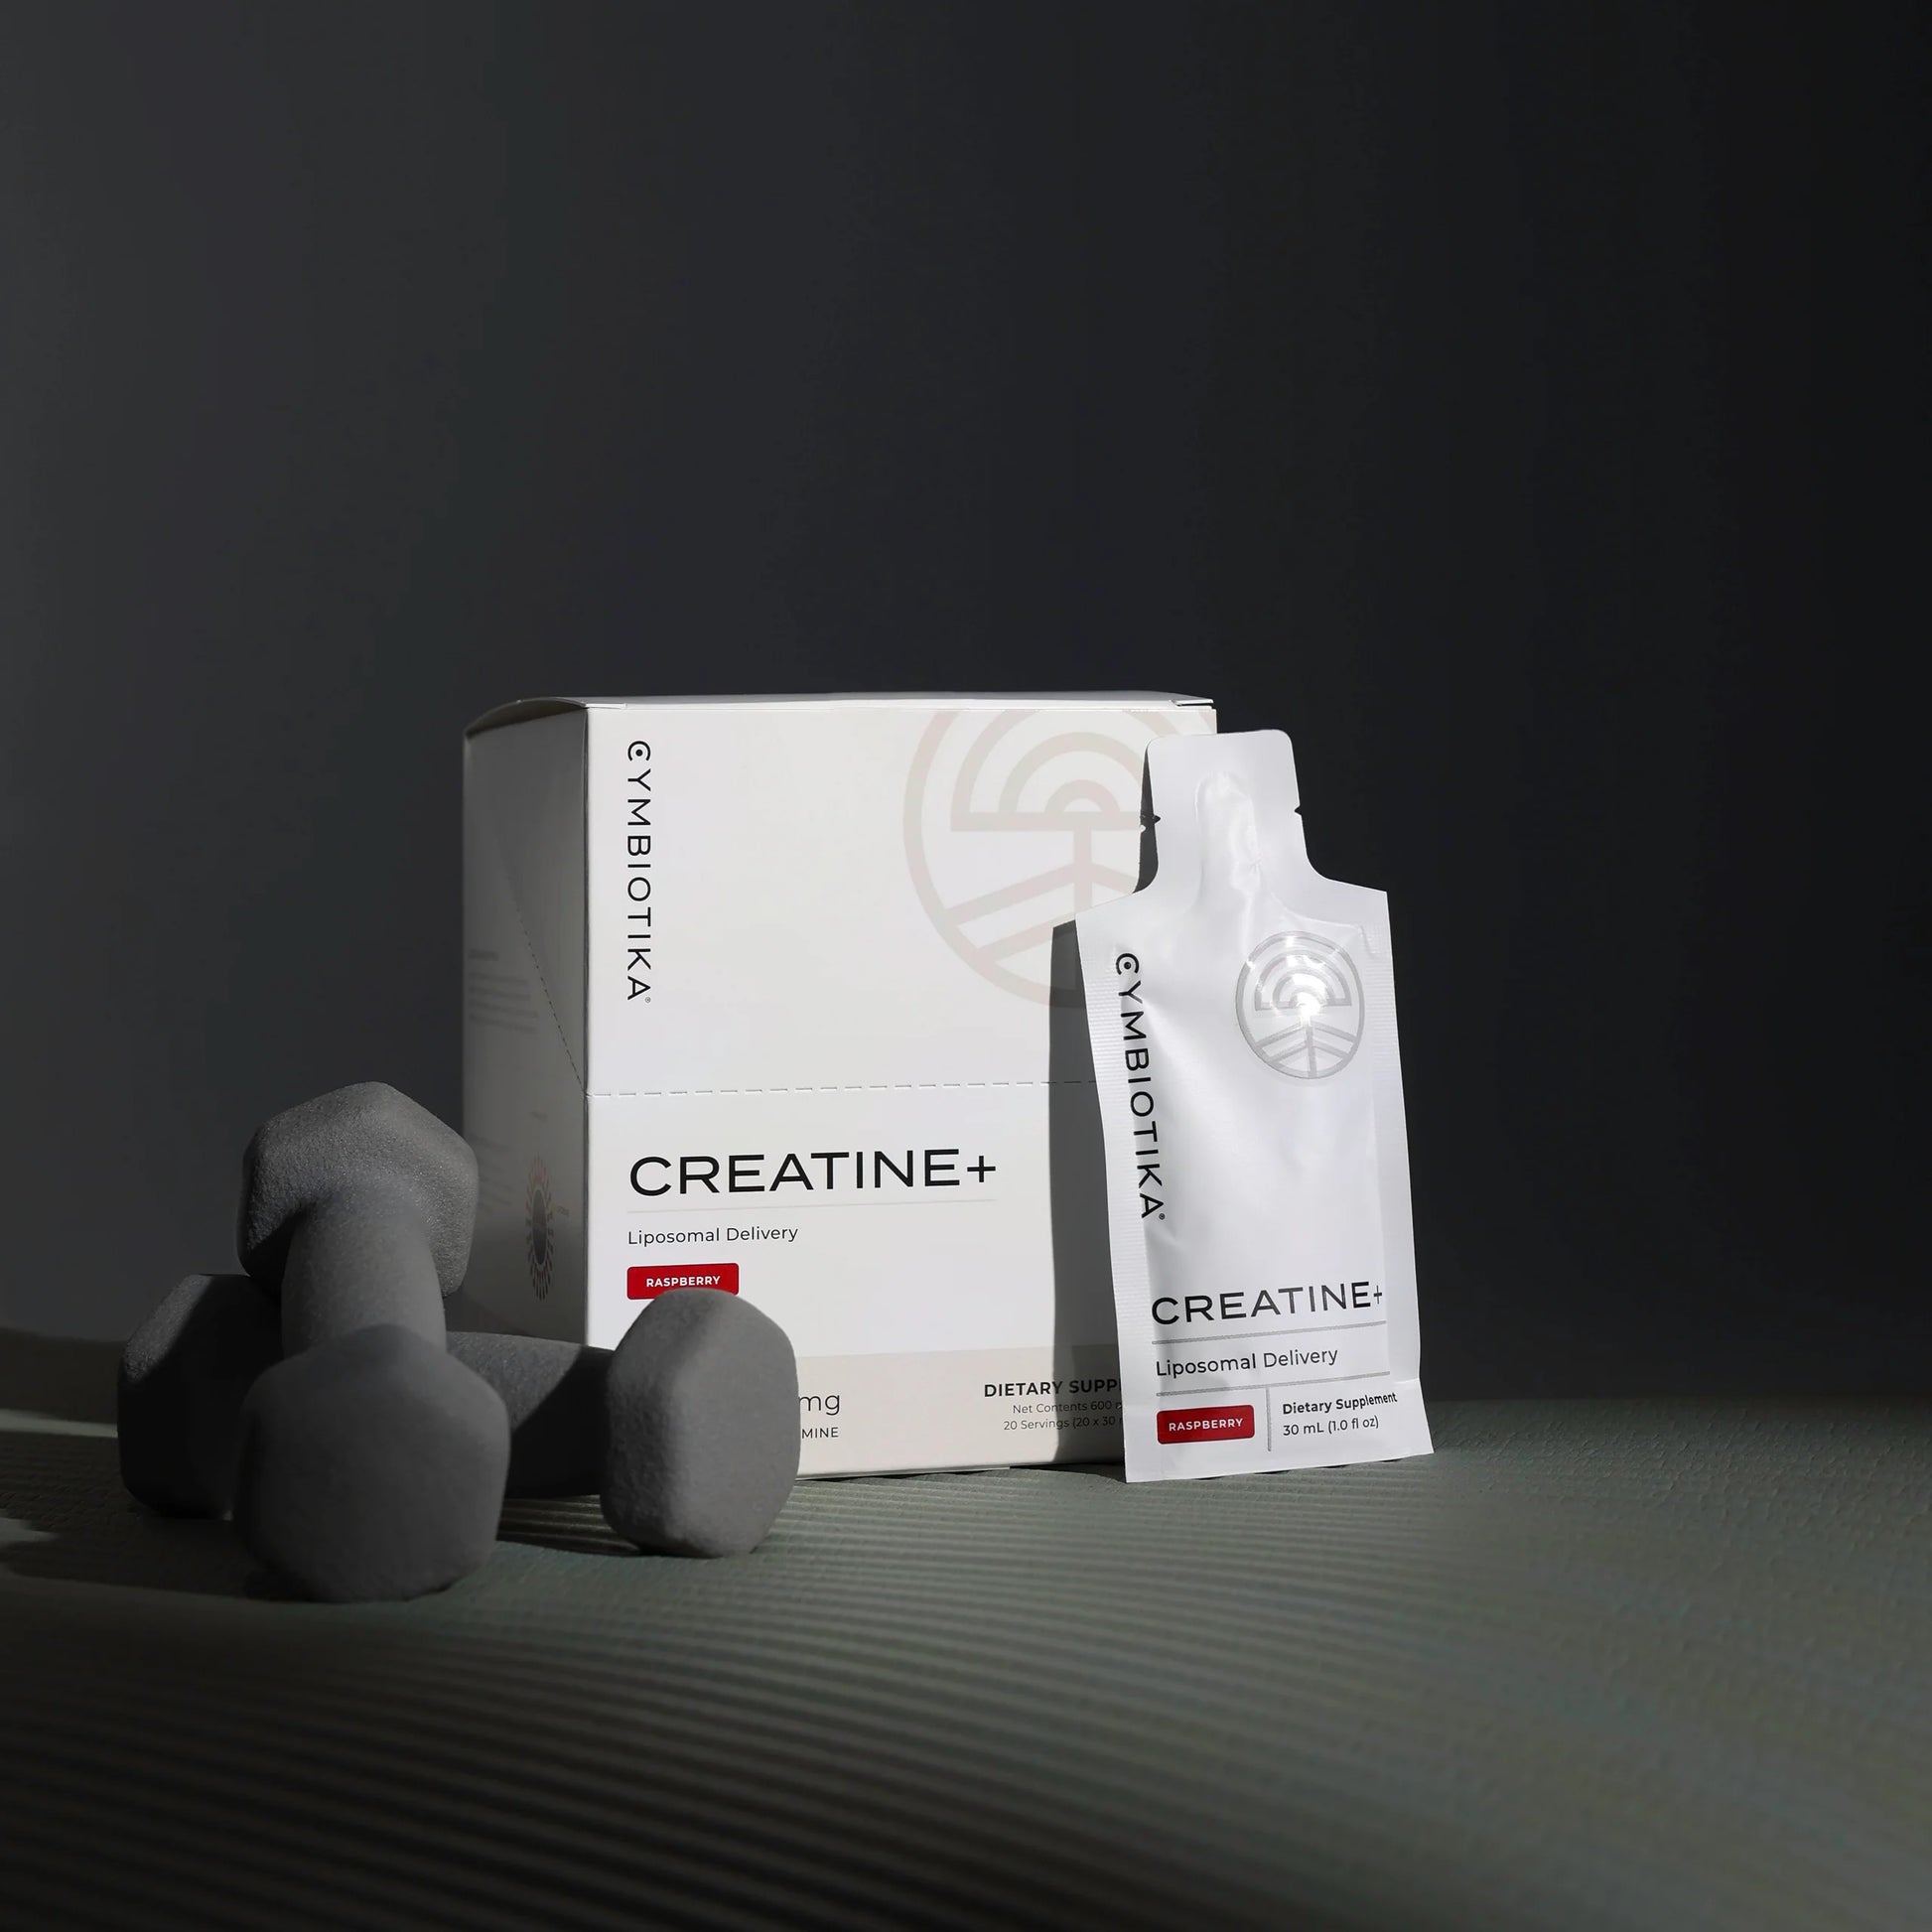 Image of Cymbiotika Creatine Packets with free weights